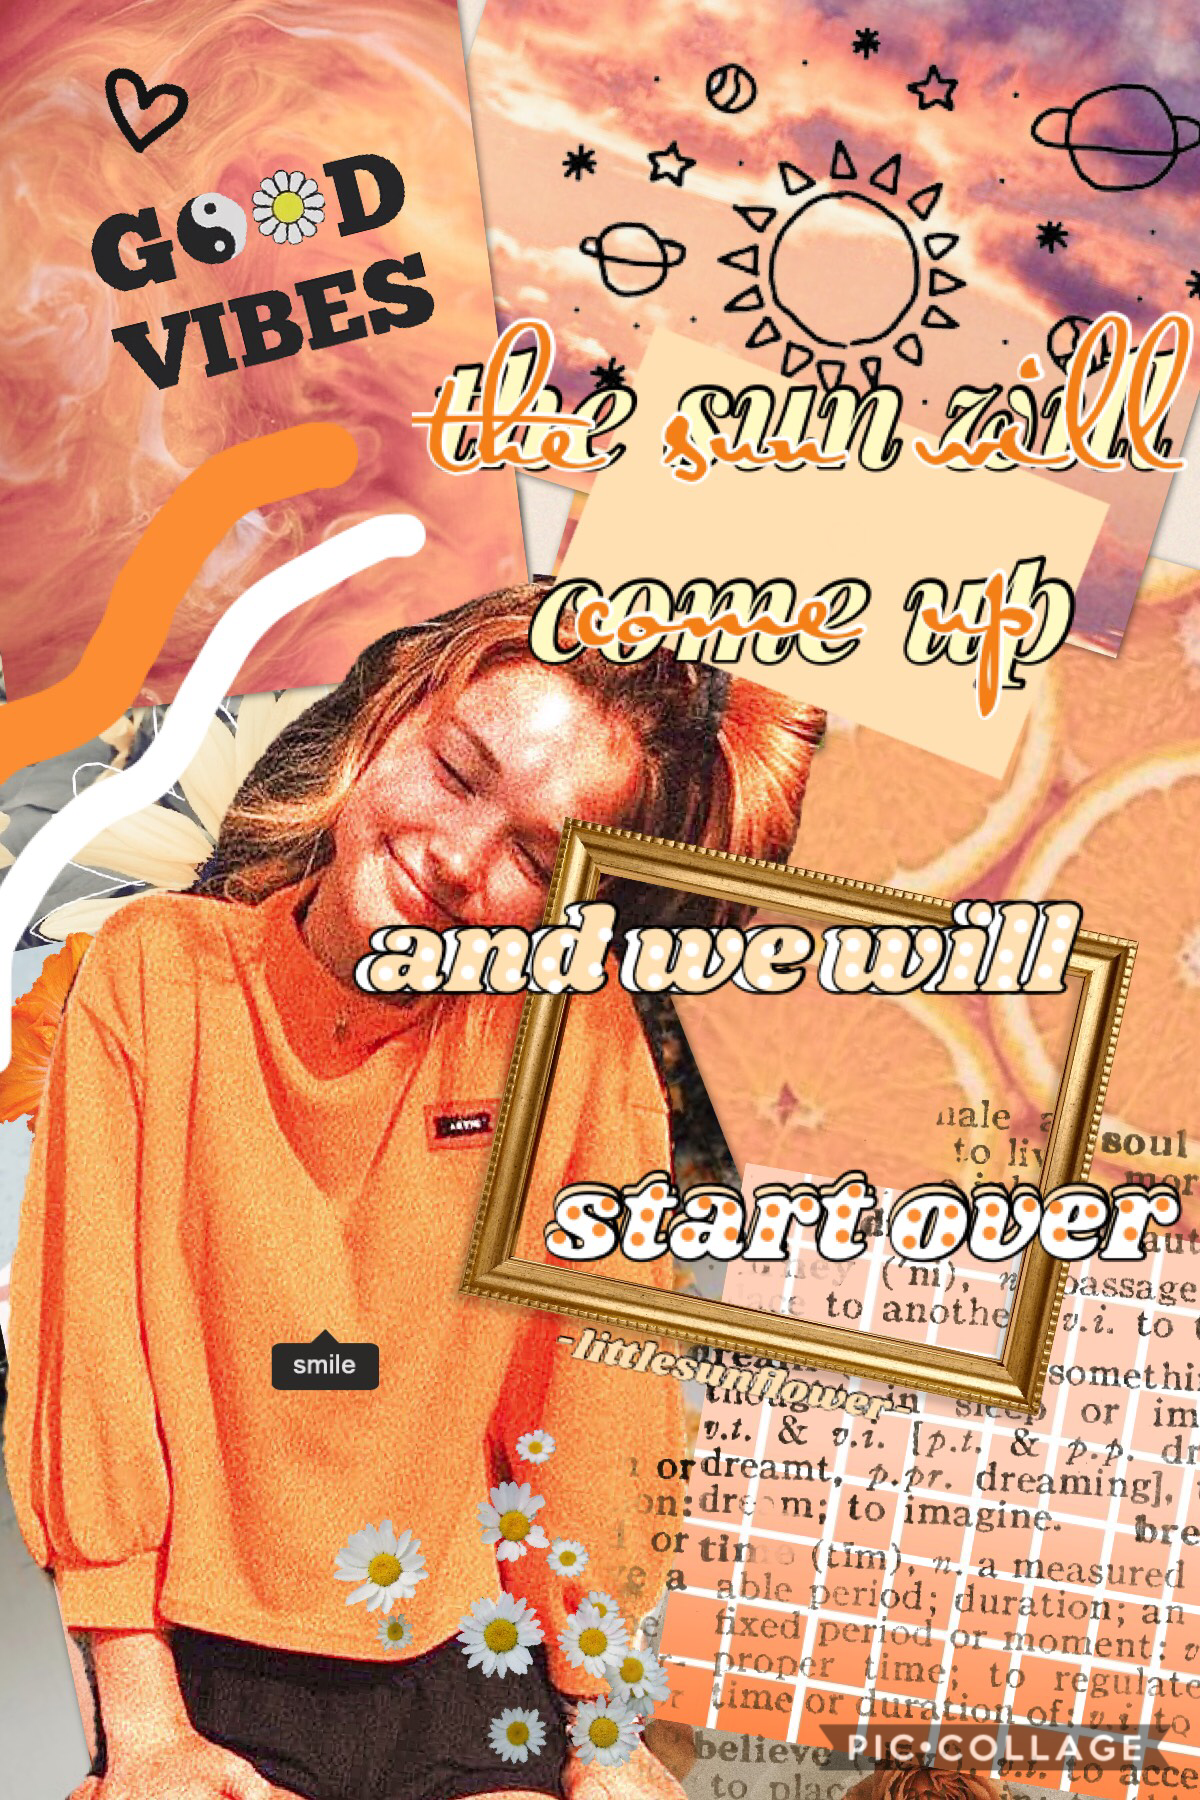 🧡t a p🧡
my first collage with this theme! lmk what you think! it took me like an hour so i hope it looks good... 😂 give me suggestions! 💕cat